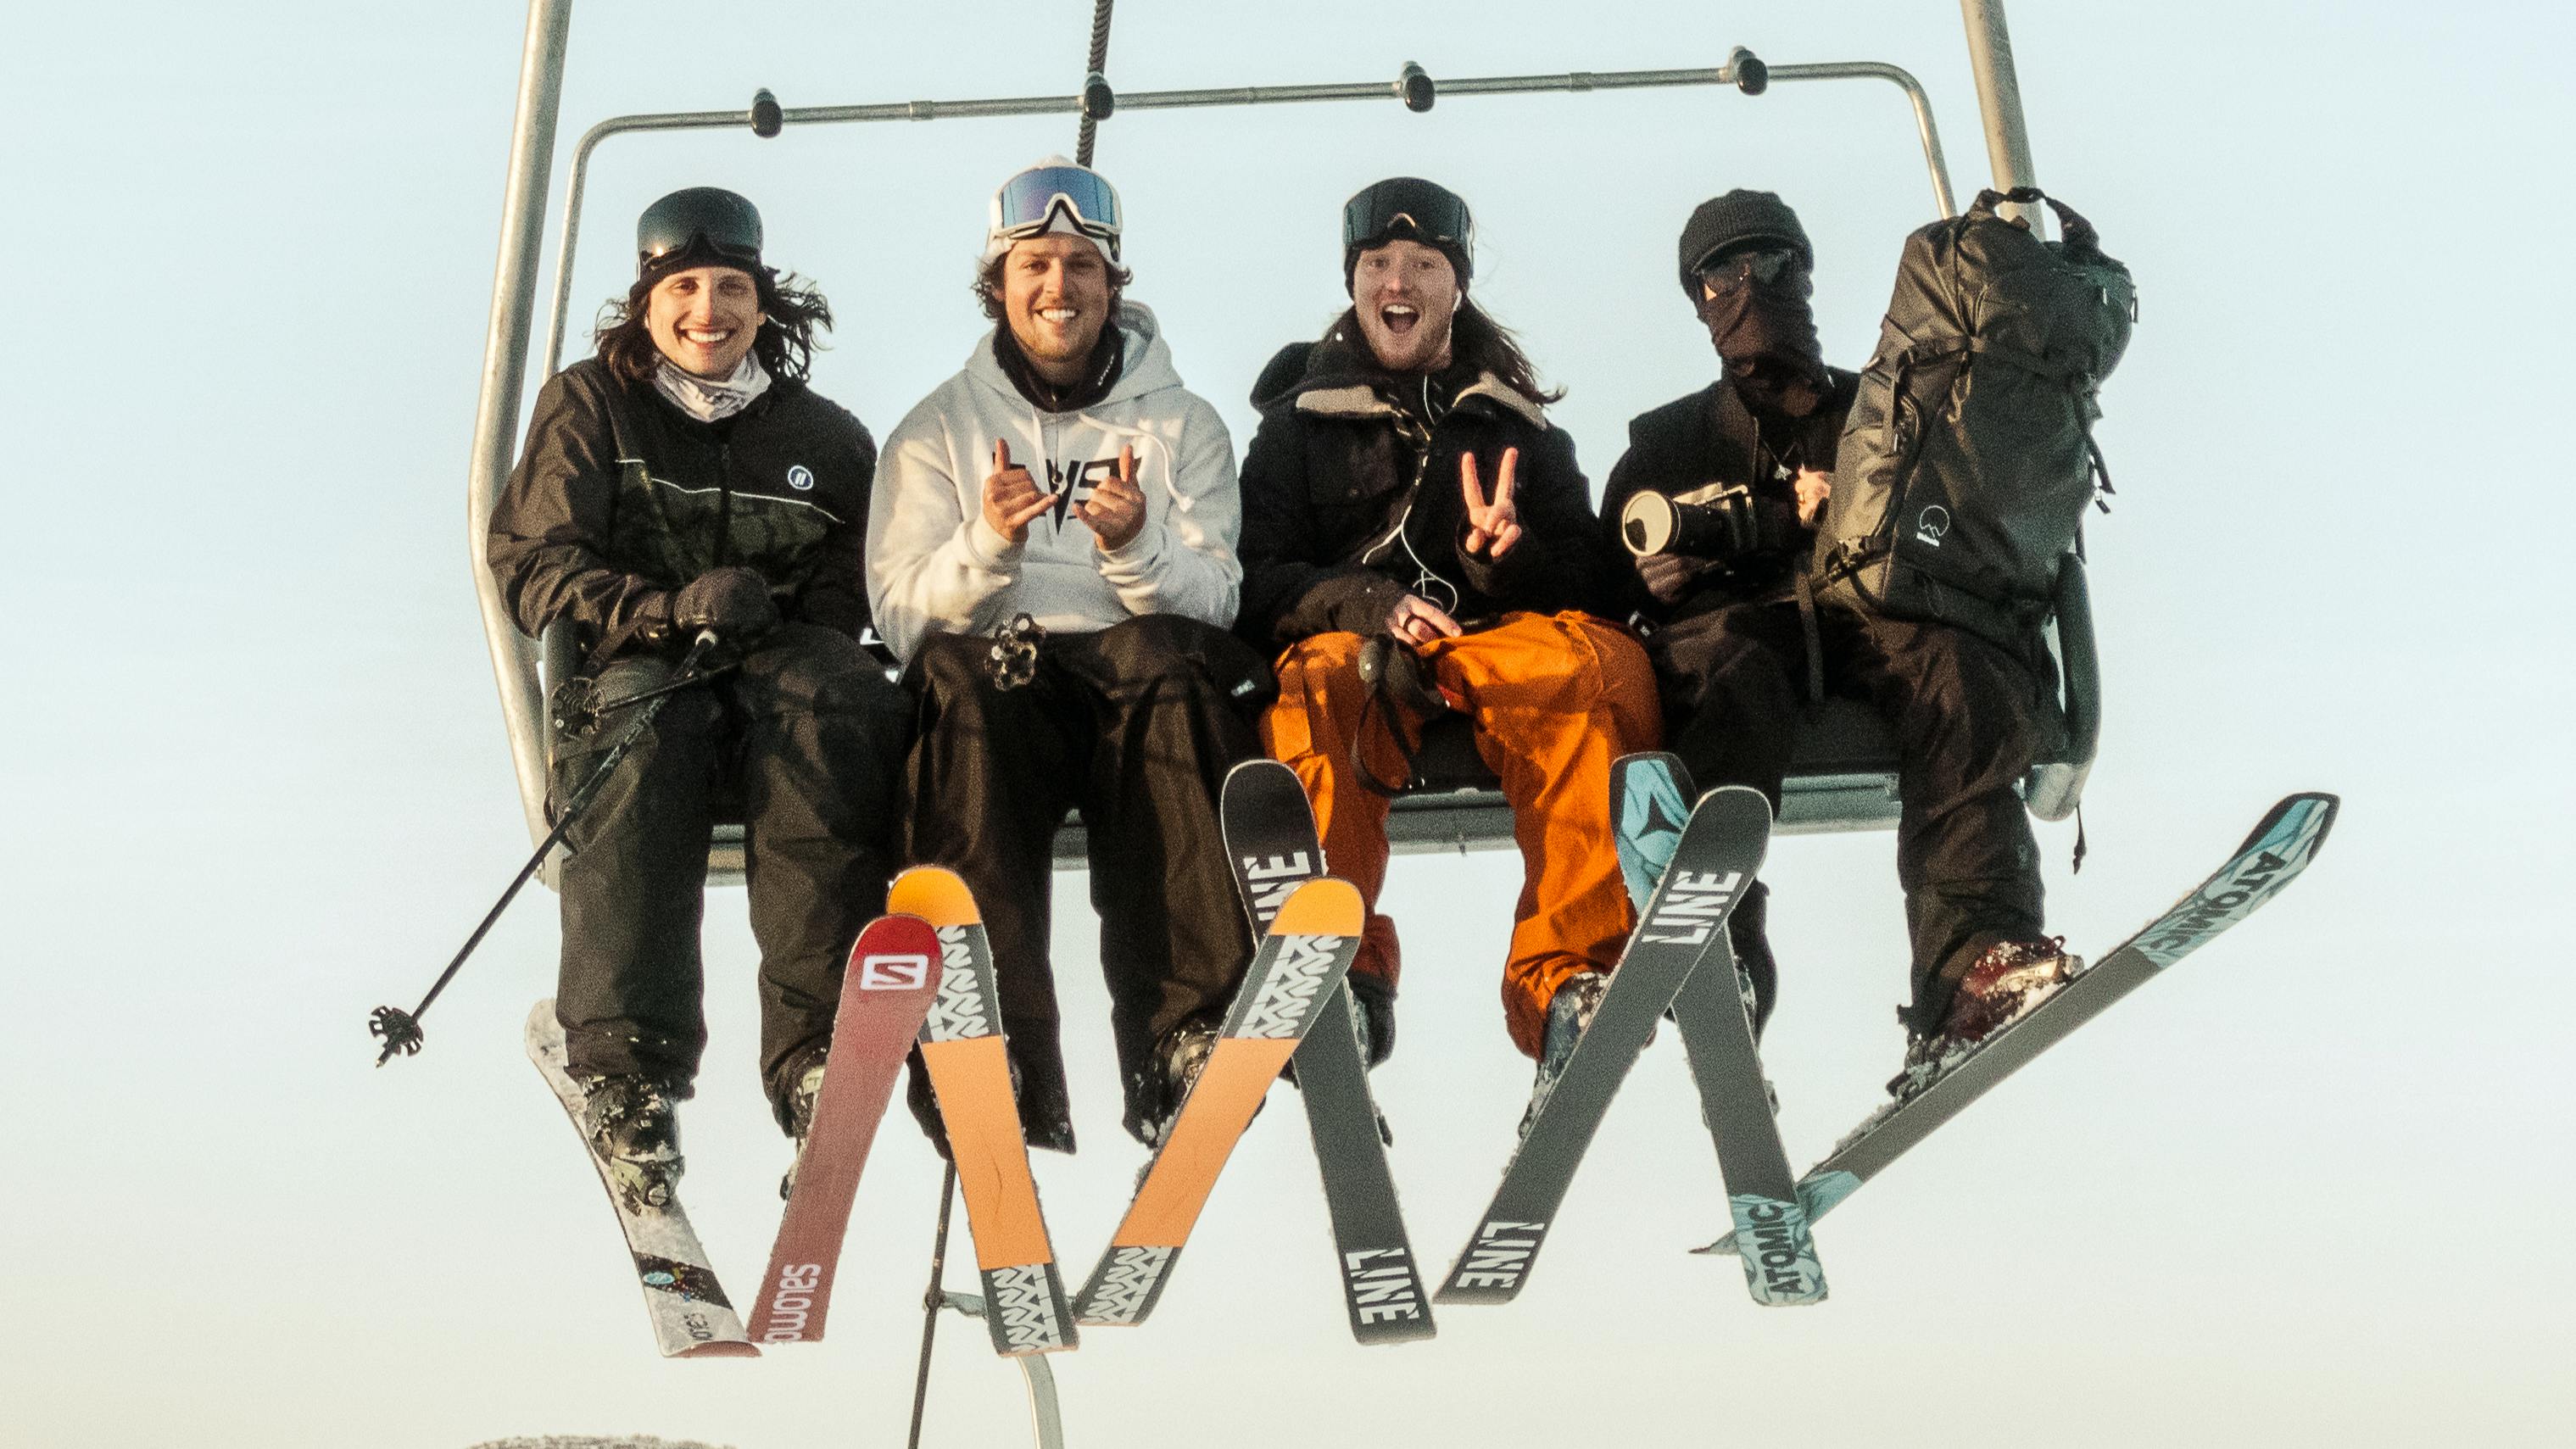 Four skiers on a chairlift all wearing different skis. 